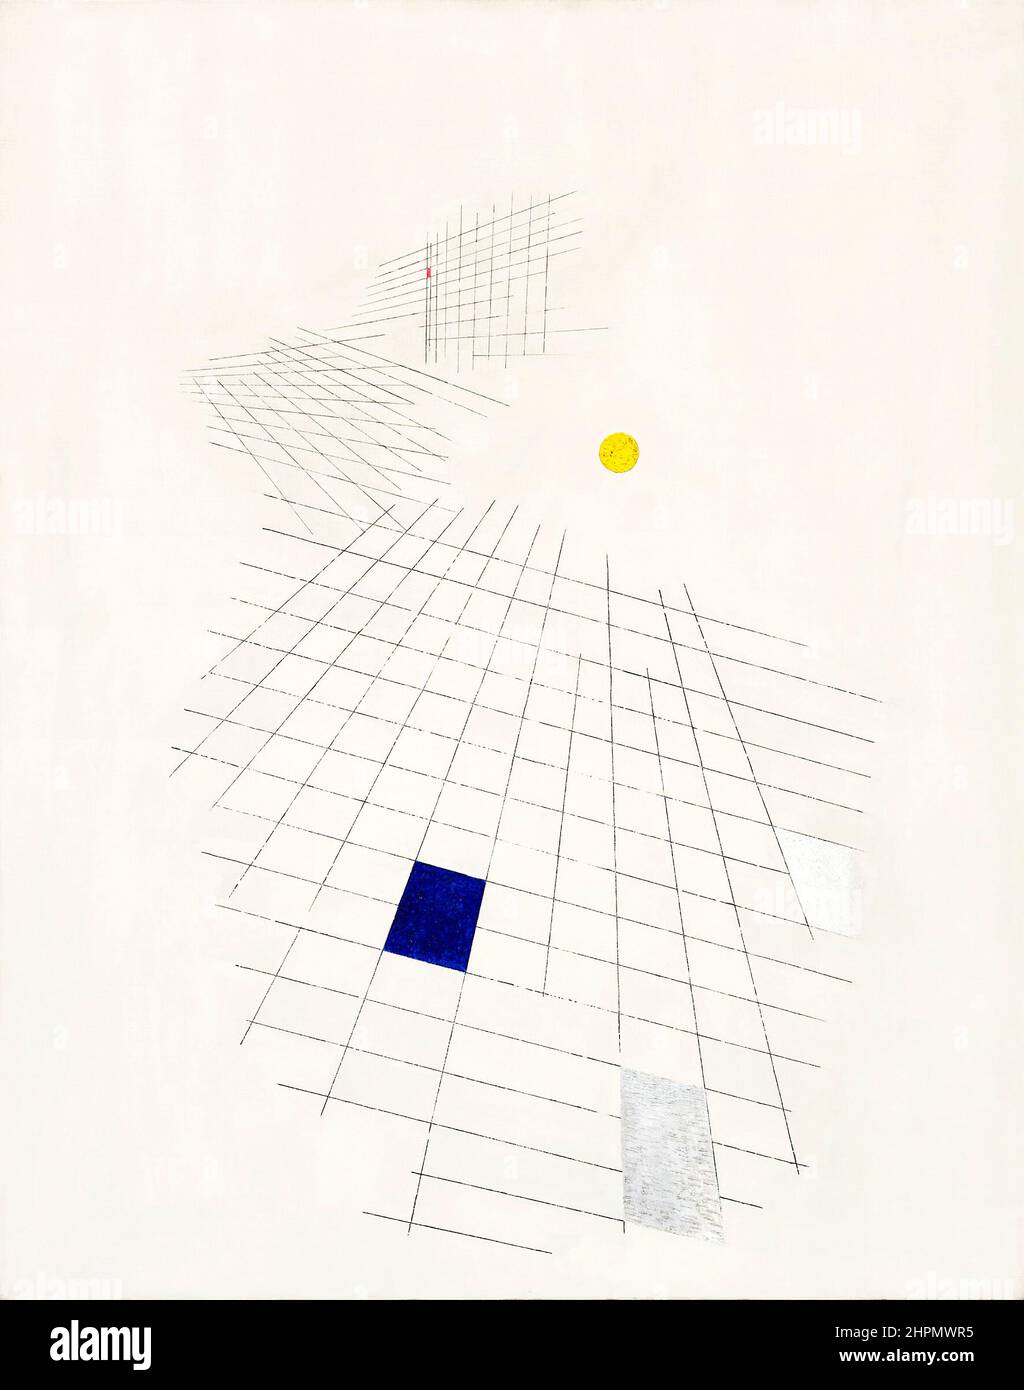 Moholy-Nagy. Untitled by the Hungarian artist and photographer, László Moholy-Nagy (b. László Weisz, 1895-1946), oil and ink on canvas, 1939 Stock Photo